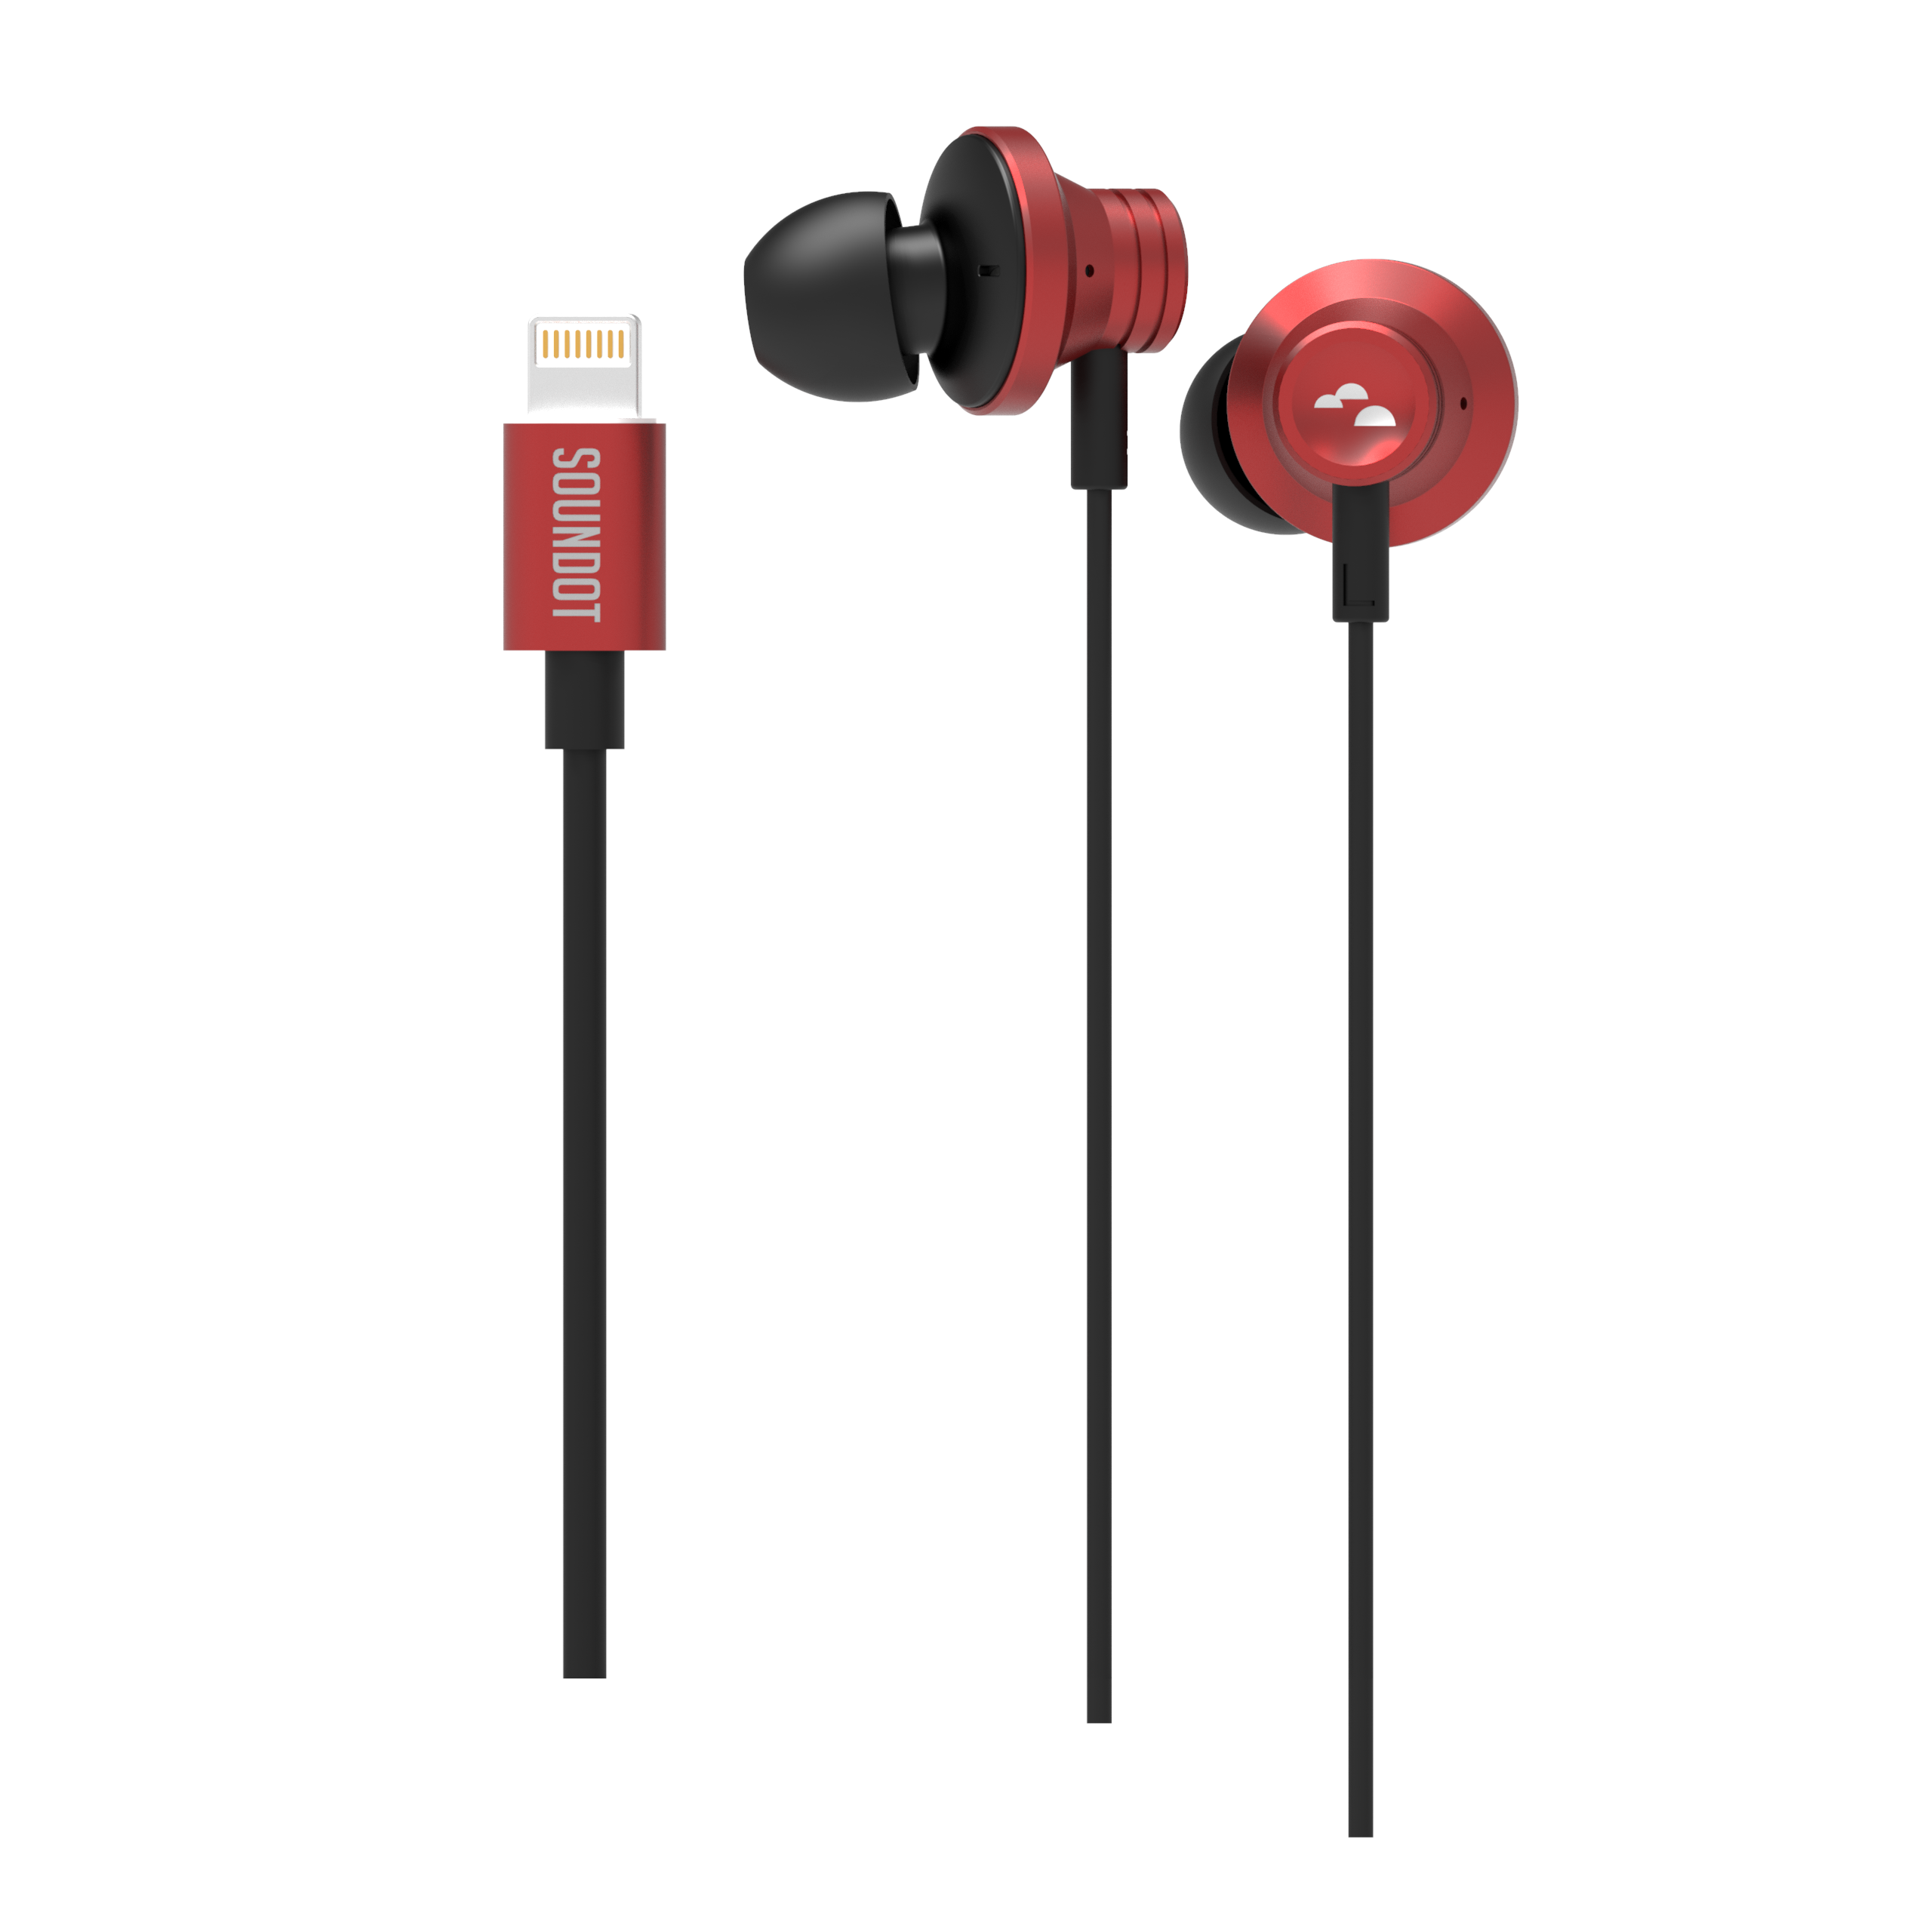 The Blackloud SOUNDOT AF1 headset for iPhones and iPads (with the Lightning interface) contains an FM chip to provide free access to FM radio anywhere in the world.